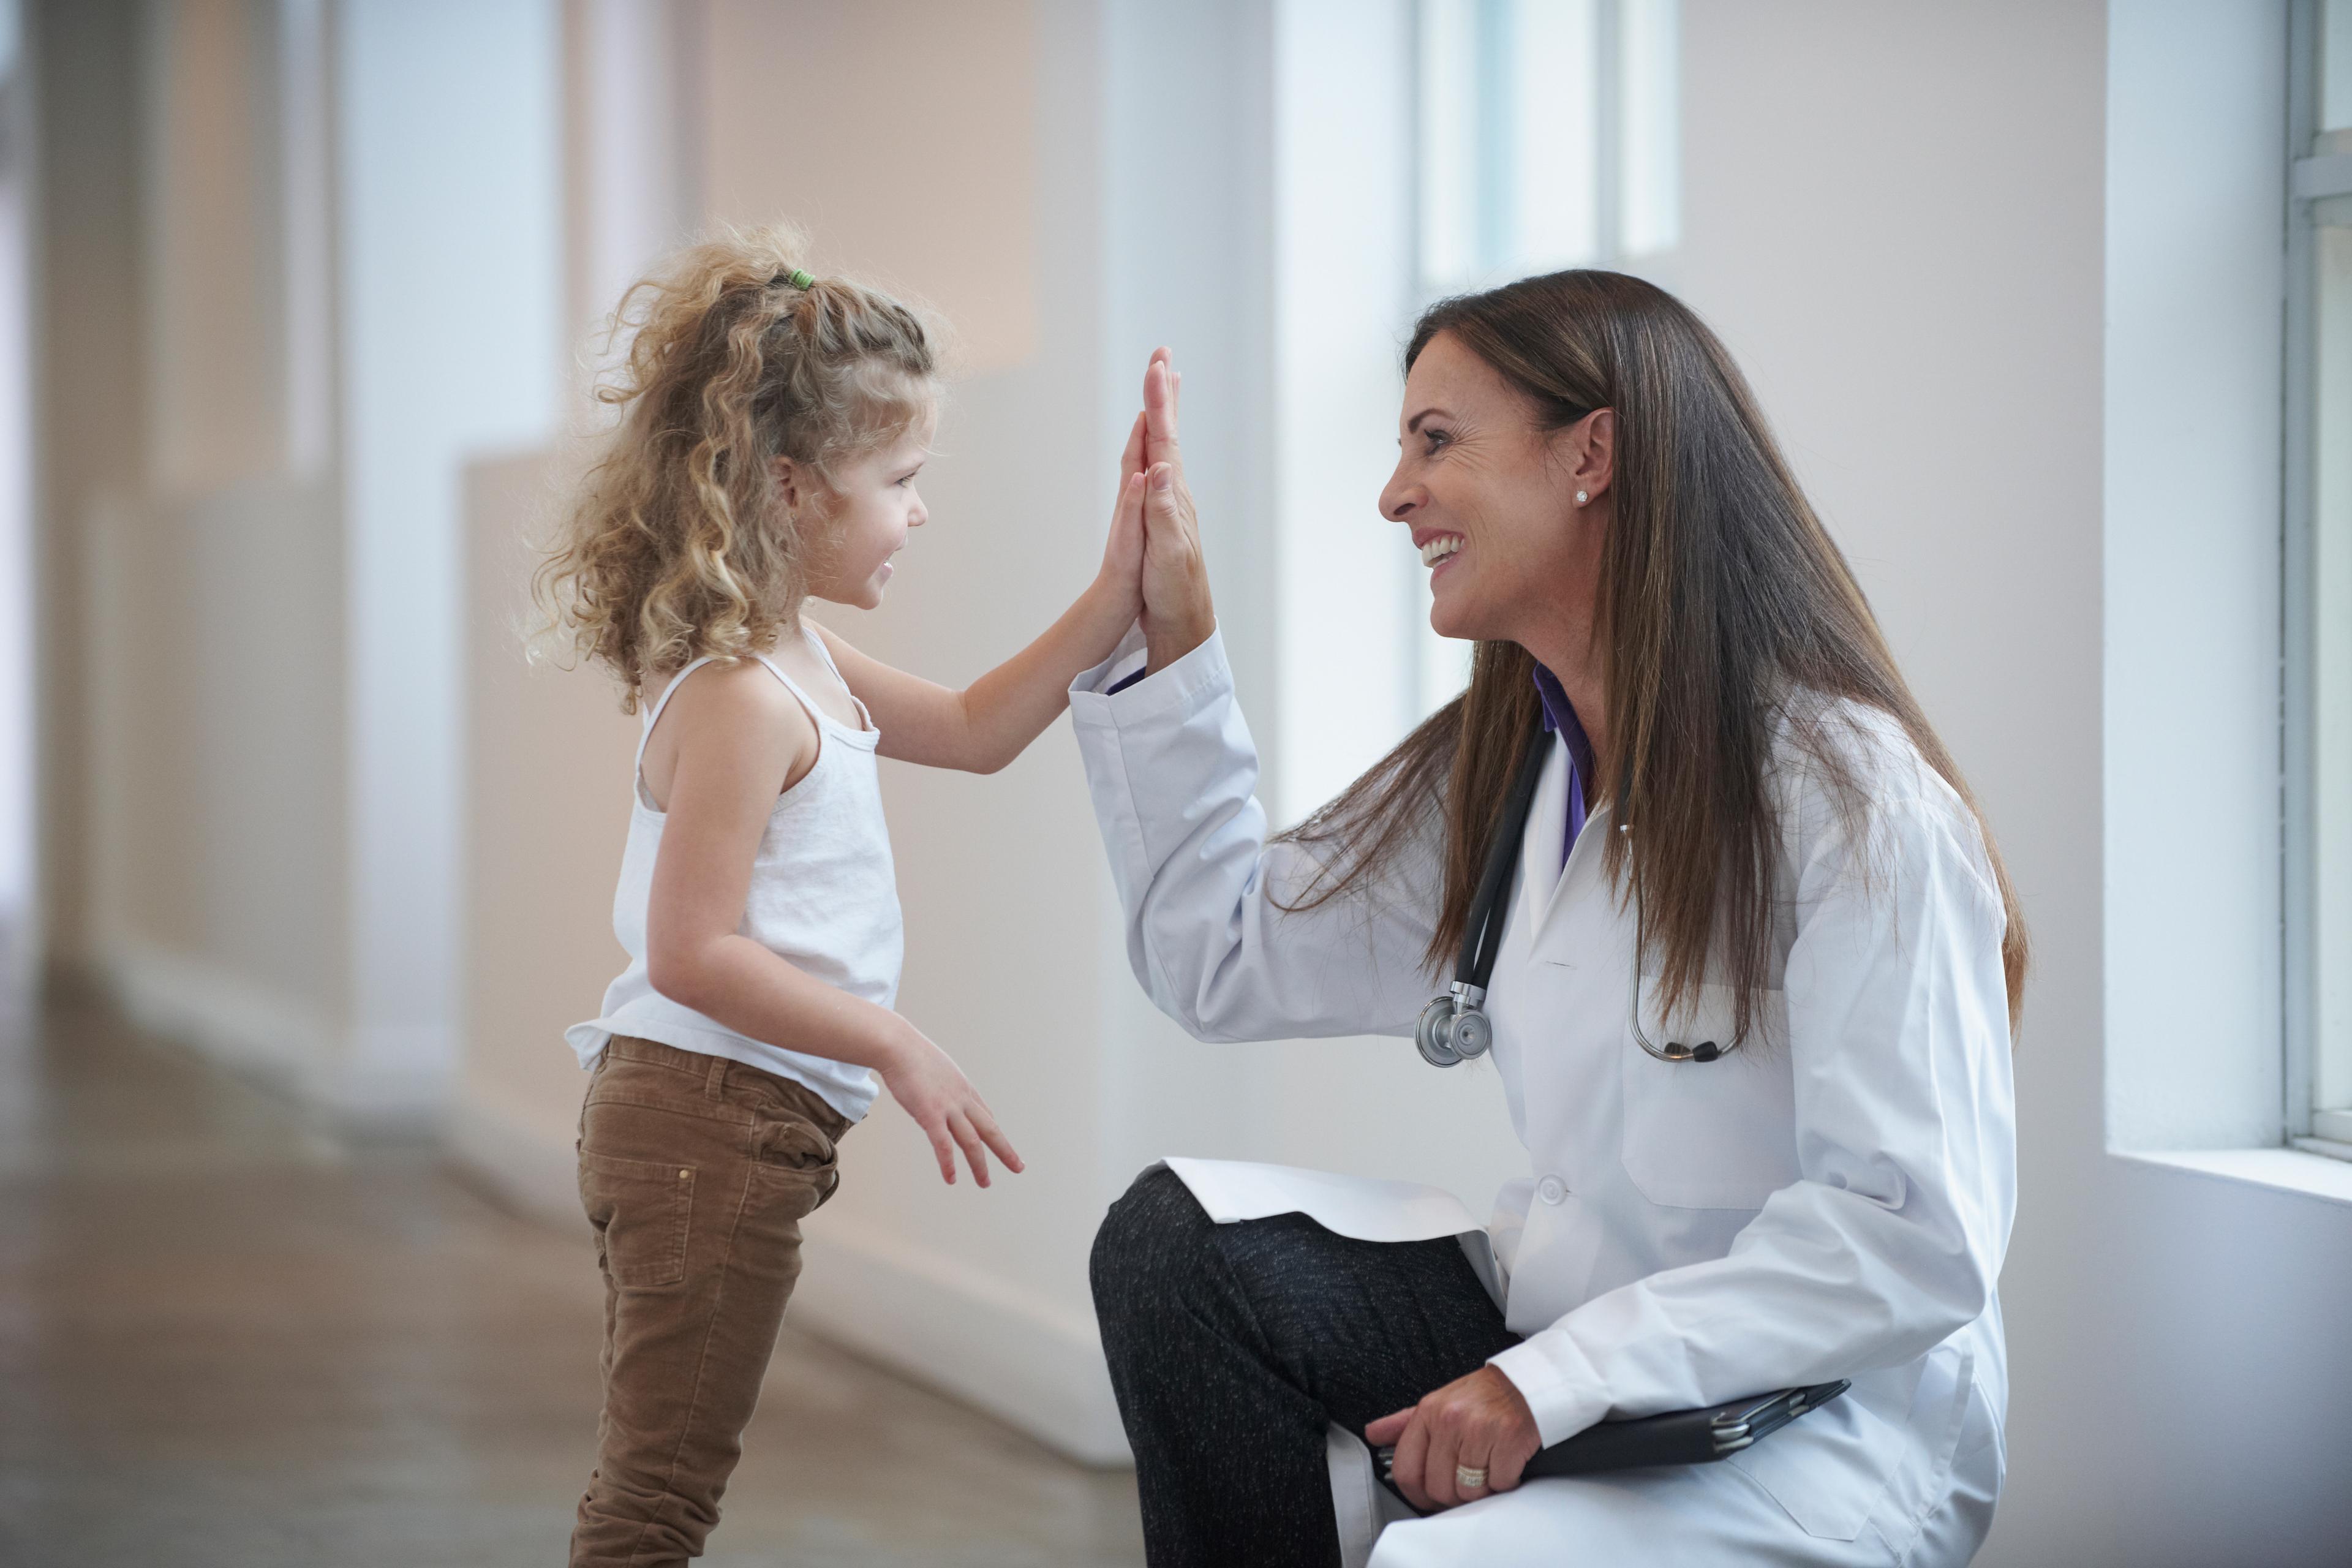 Why Nurse Practitioner? -- a picture of an NP high-fiving a young girl.